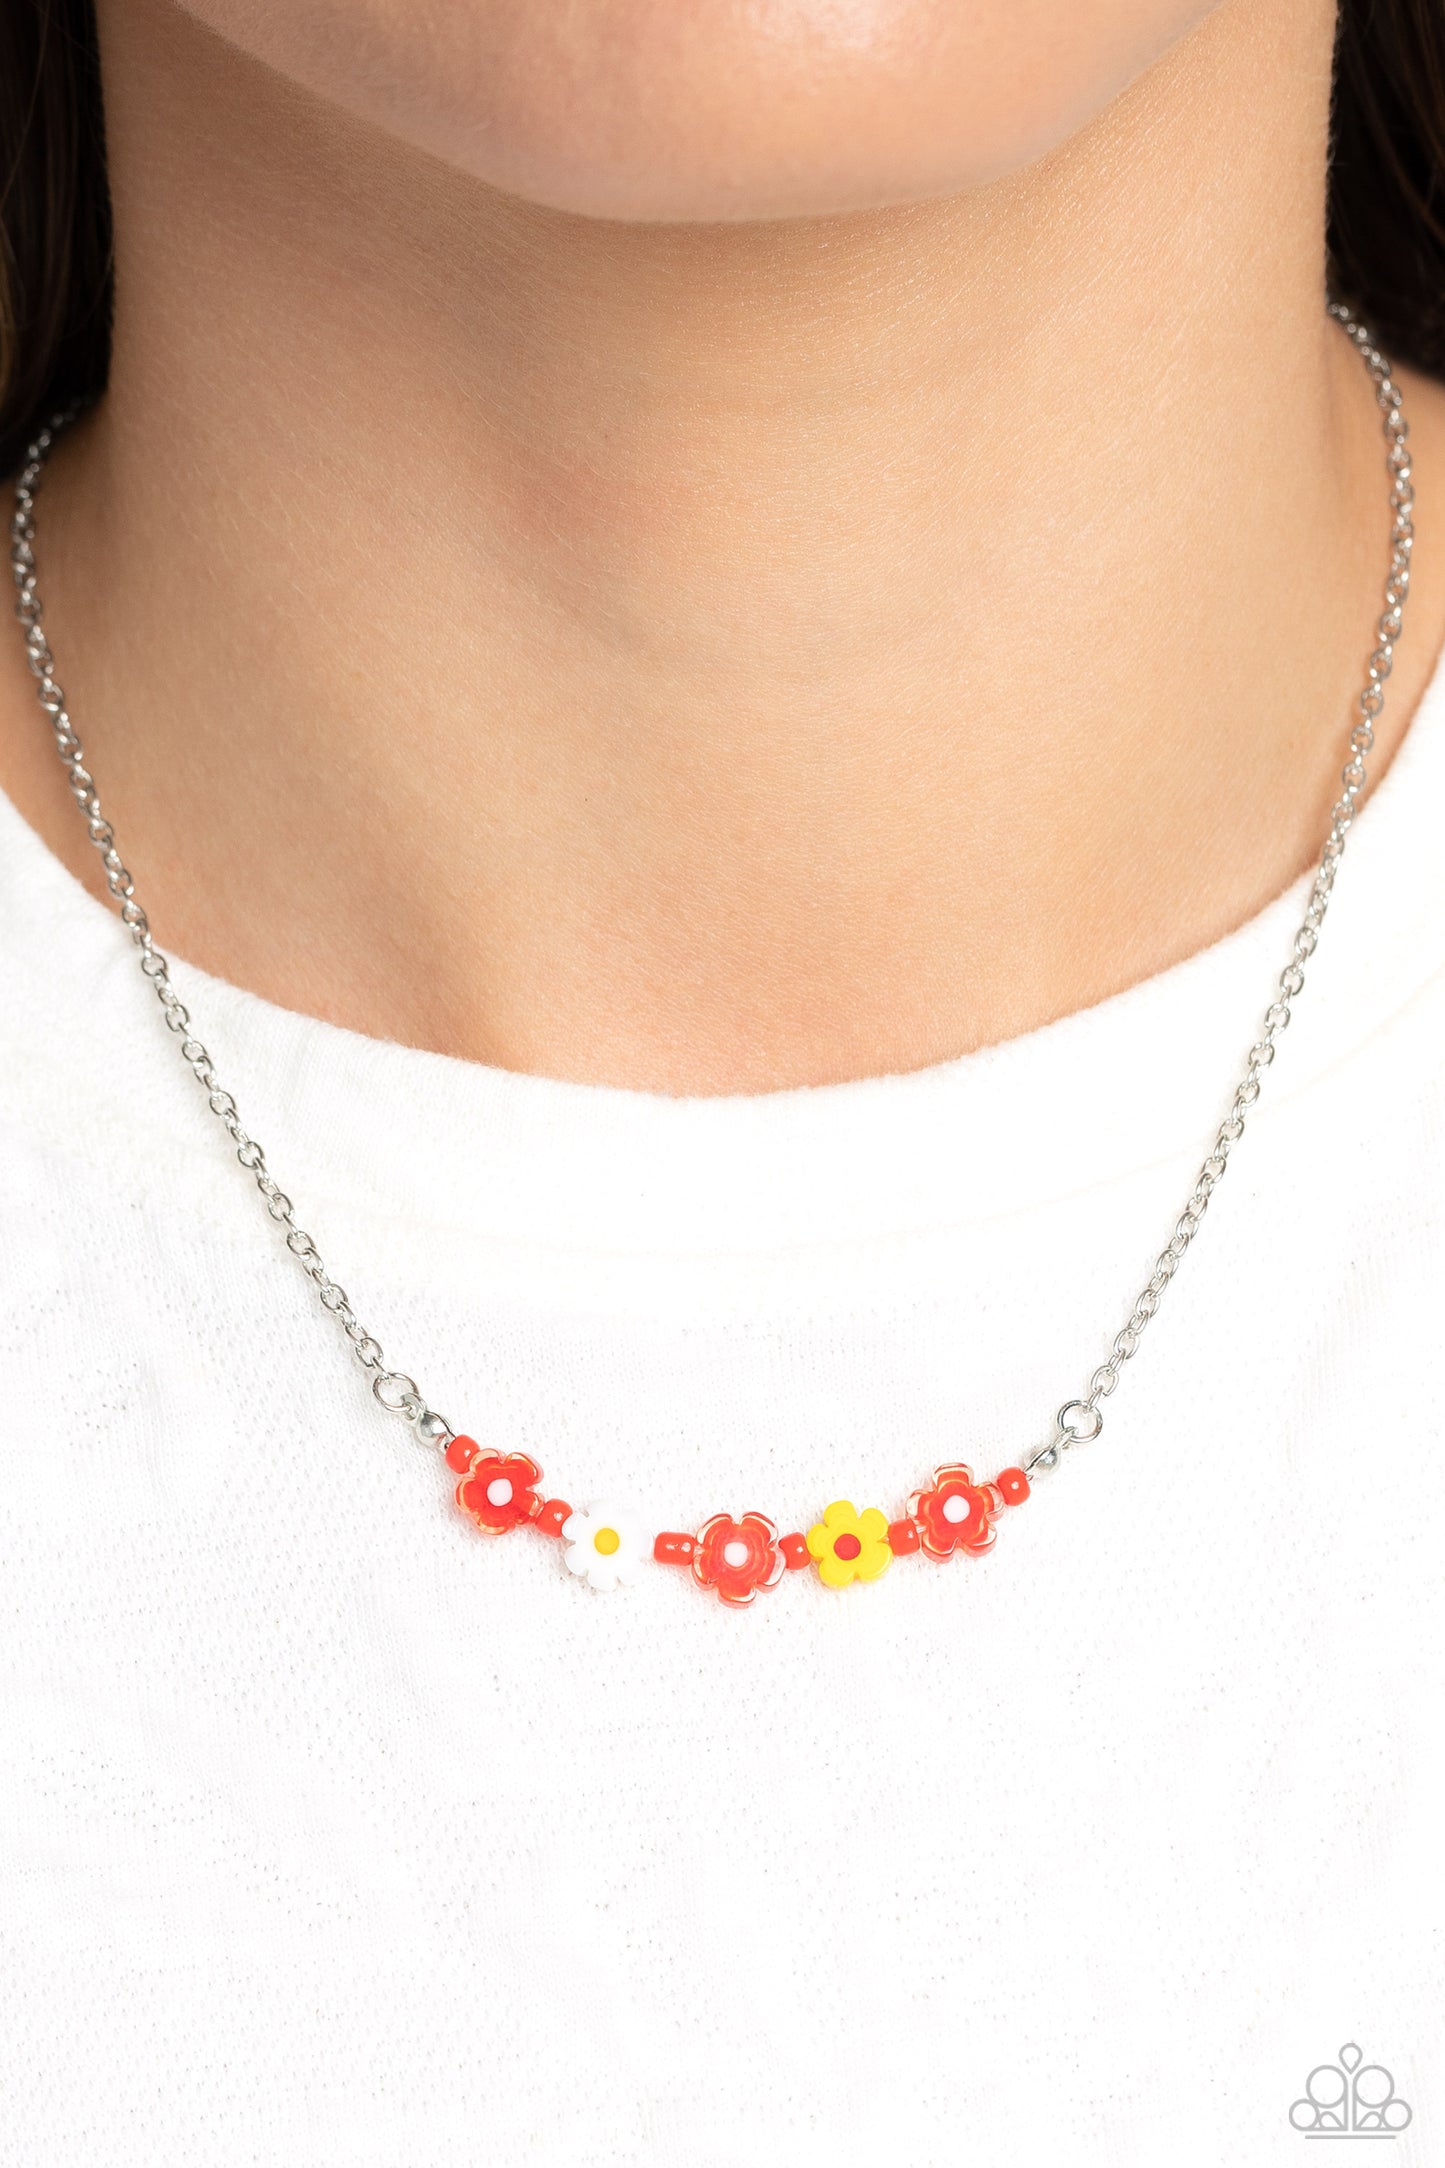 Paparazzi Accessories - BOUQUET We Go - Red Flower Necklaces Infused at the bottom of a dainty silver chain, a row of flower beads in shades of red, yellow, and white glide down the neckline. Separating each floral bead, red seed beads create additional pops of color against the seasonal flowers. Features an adjustable clasp closure.  Sold as one individual necklace. Includes one pair of matching earrings.